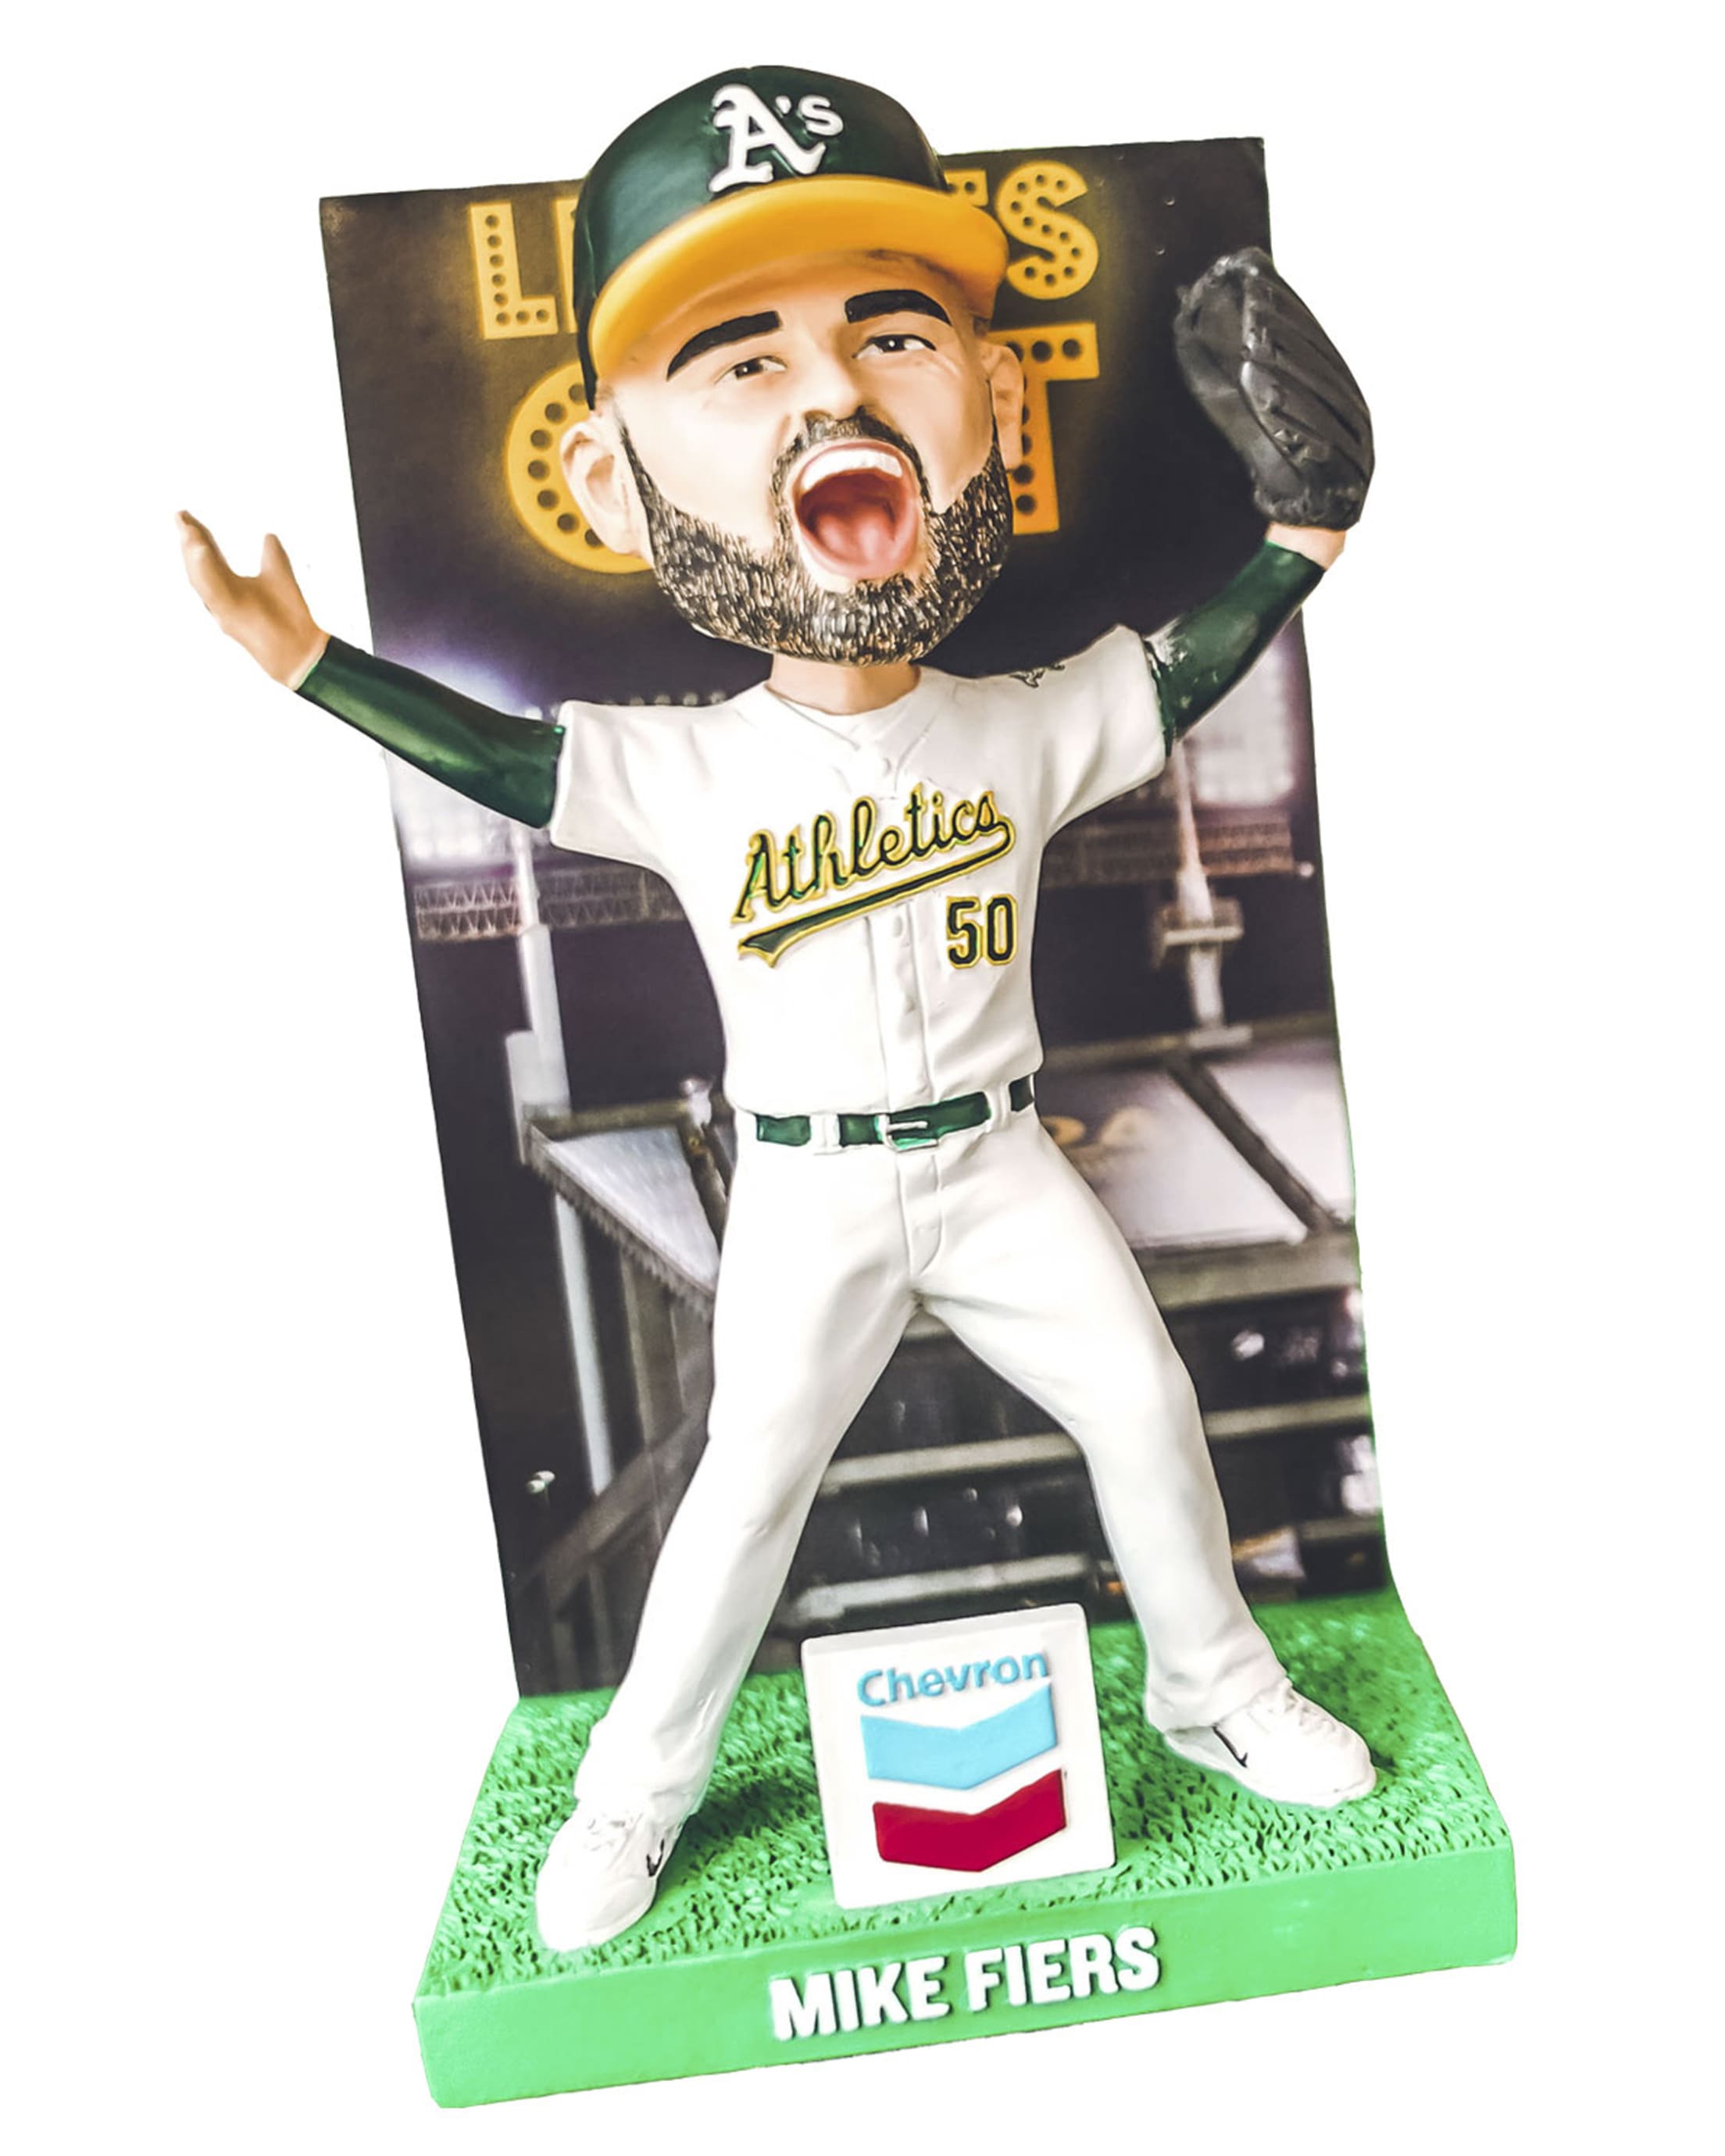 National Bobblehead Hall Of Fame celebrates Oakland A's